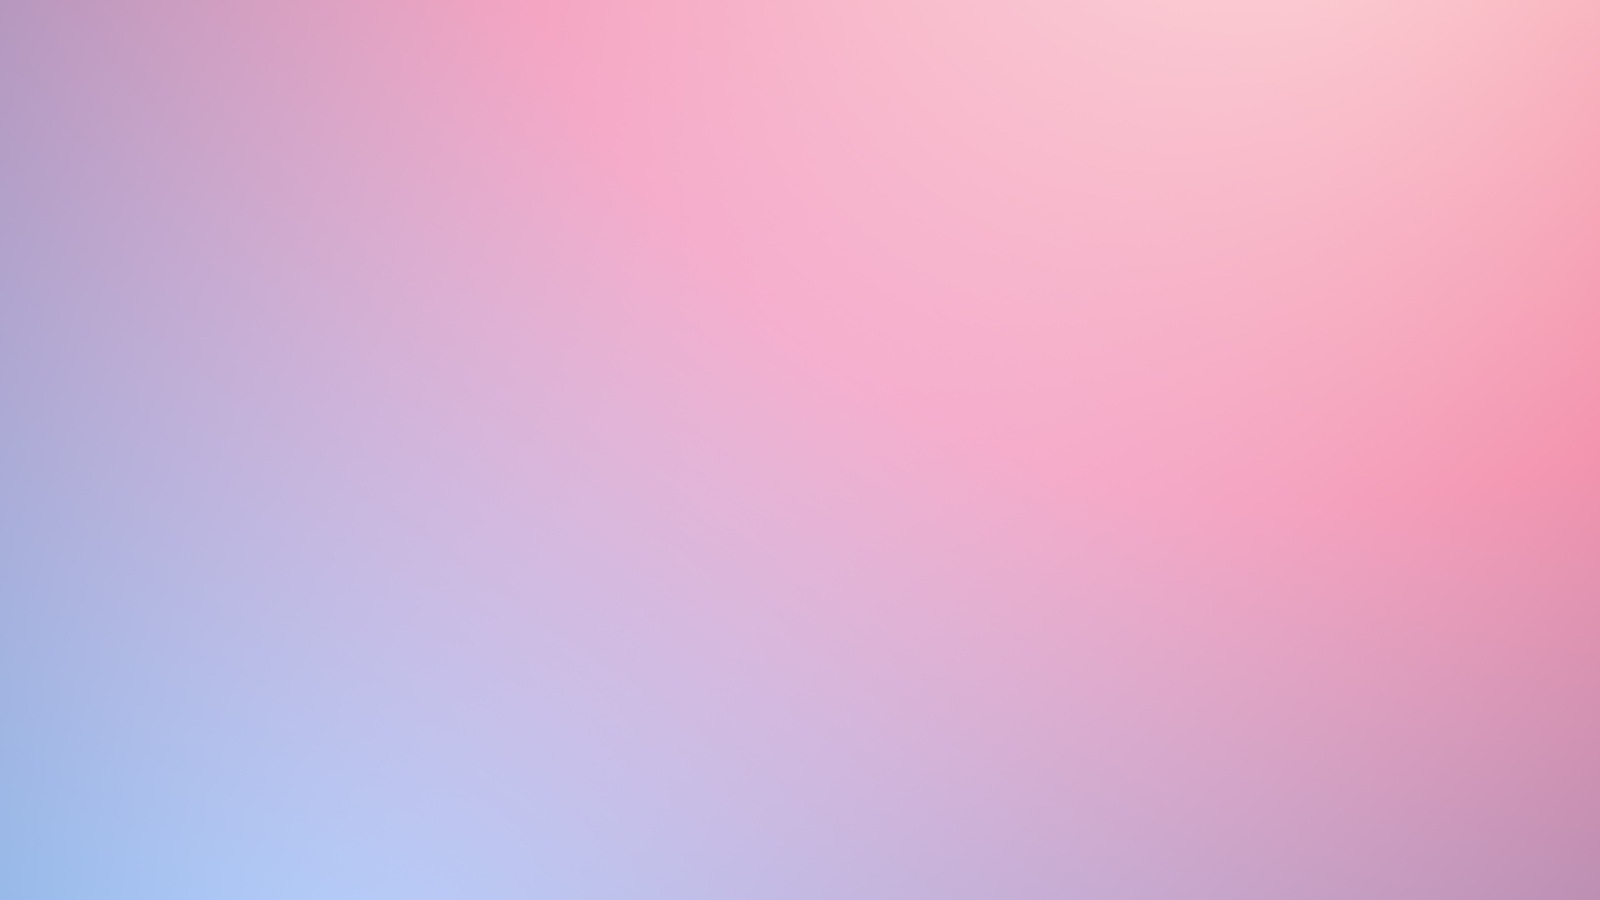 Pink to blue gradient